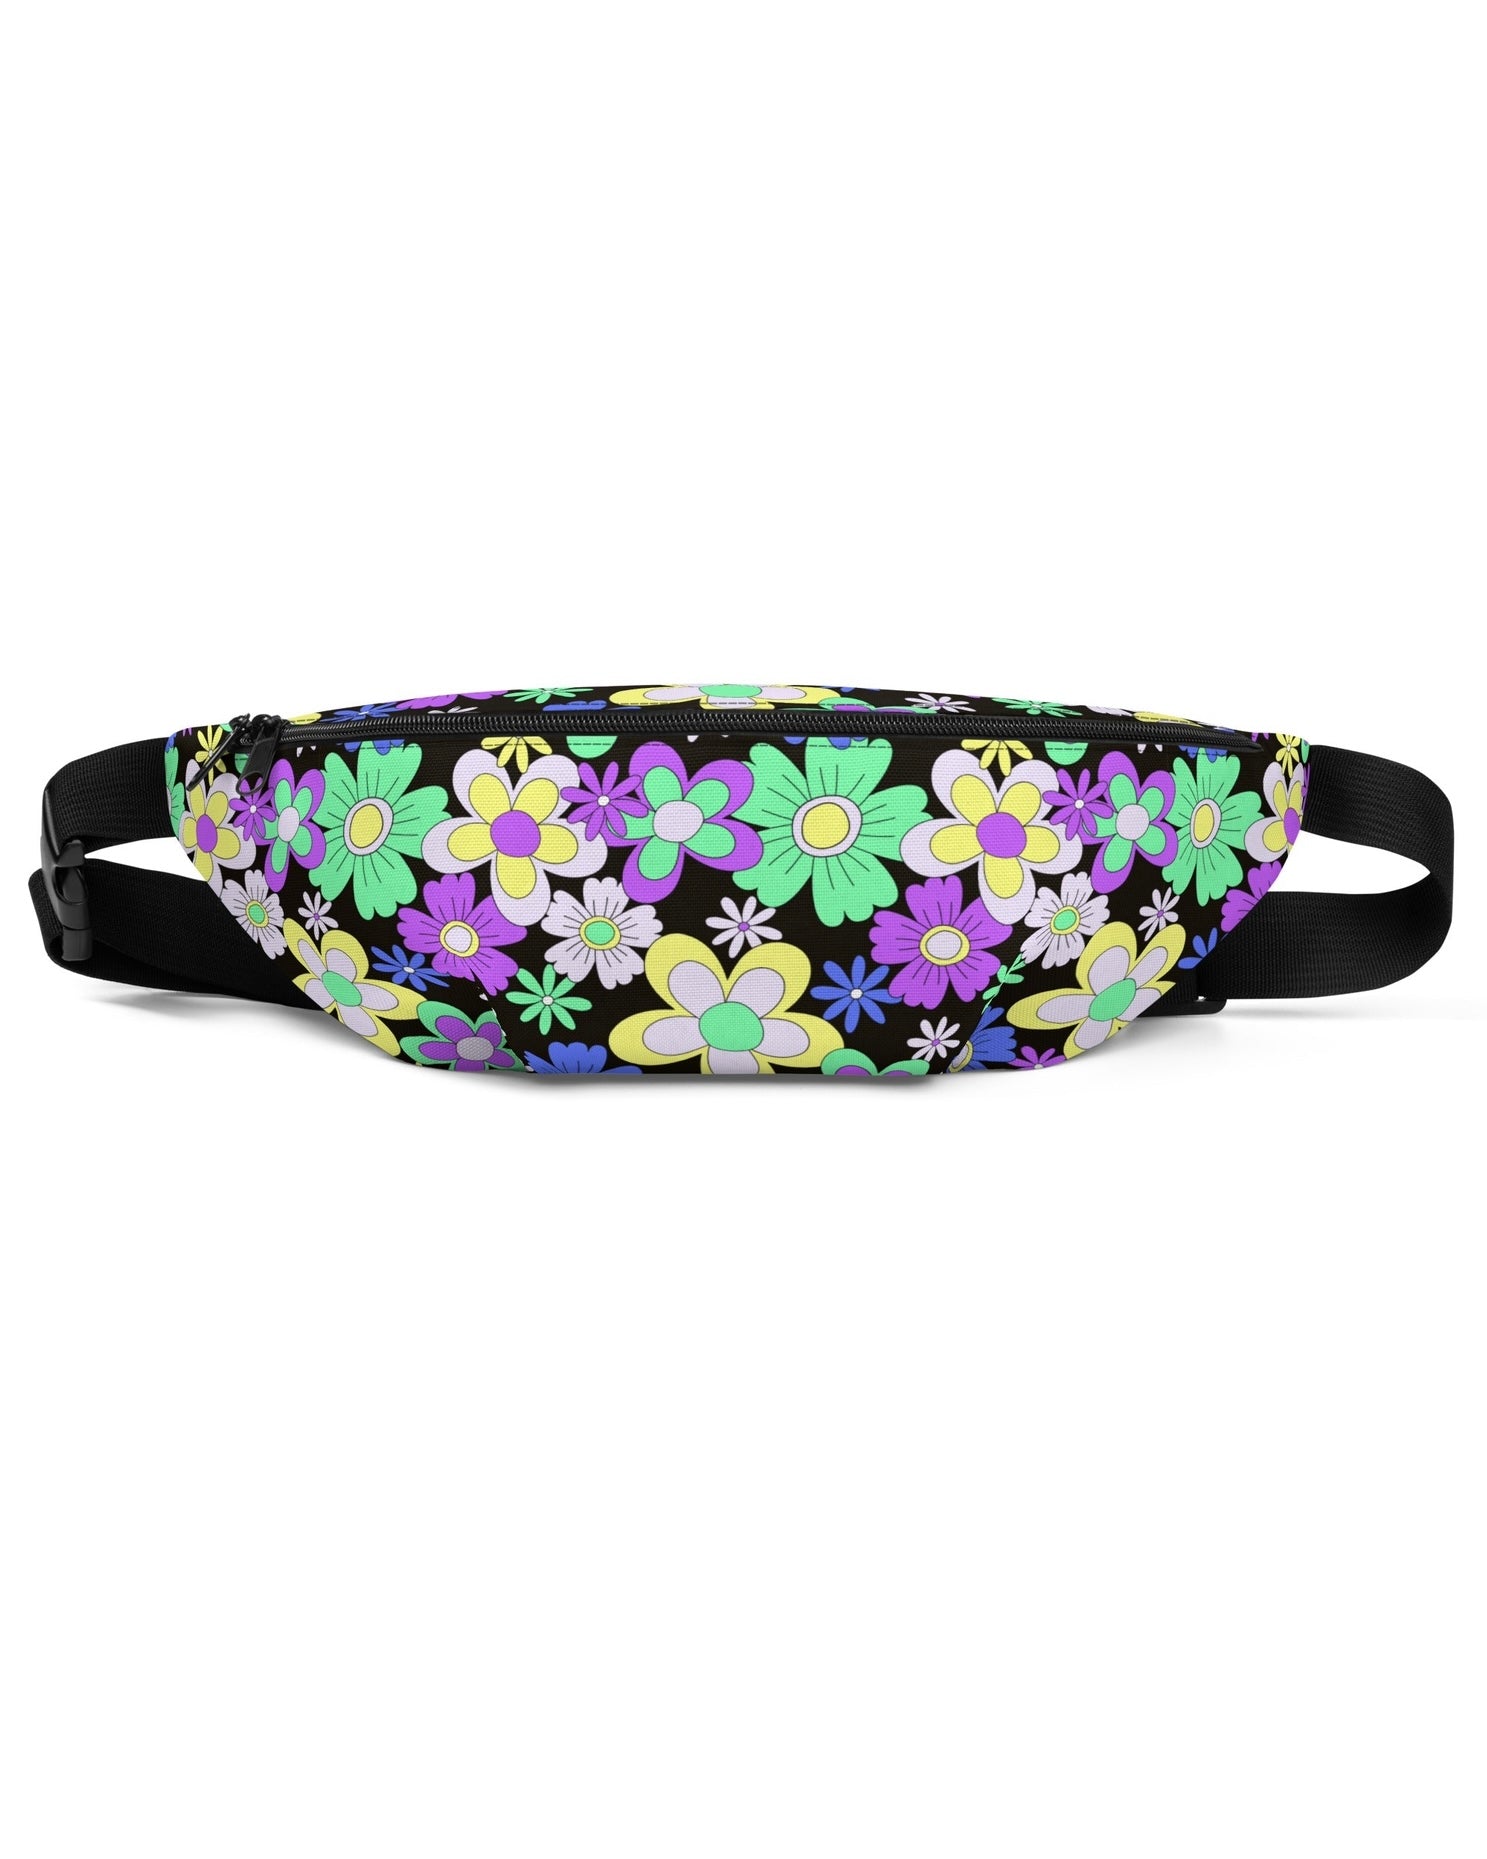 Crazy Daisy Fanny Pack, Fanny Pack, - One Stop Rave